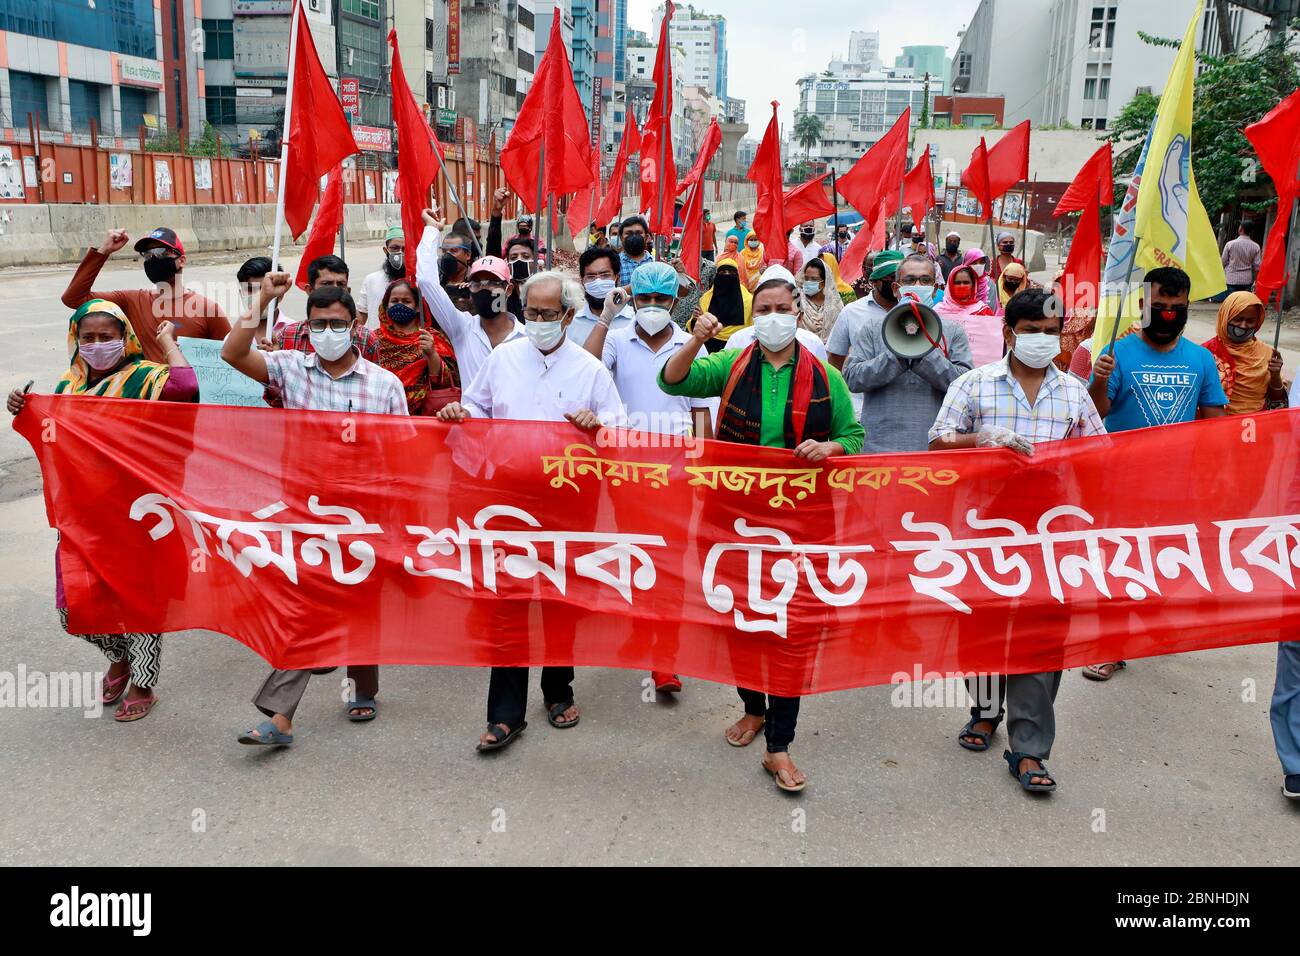 Dhaka, Bangladesh - May 15, 2020: Garment Workers Trade Union Center gathers and protests in Dhaka demanding payment of their due wages and Eid festiv Stock Photo